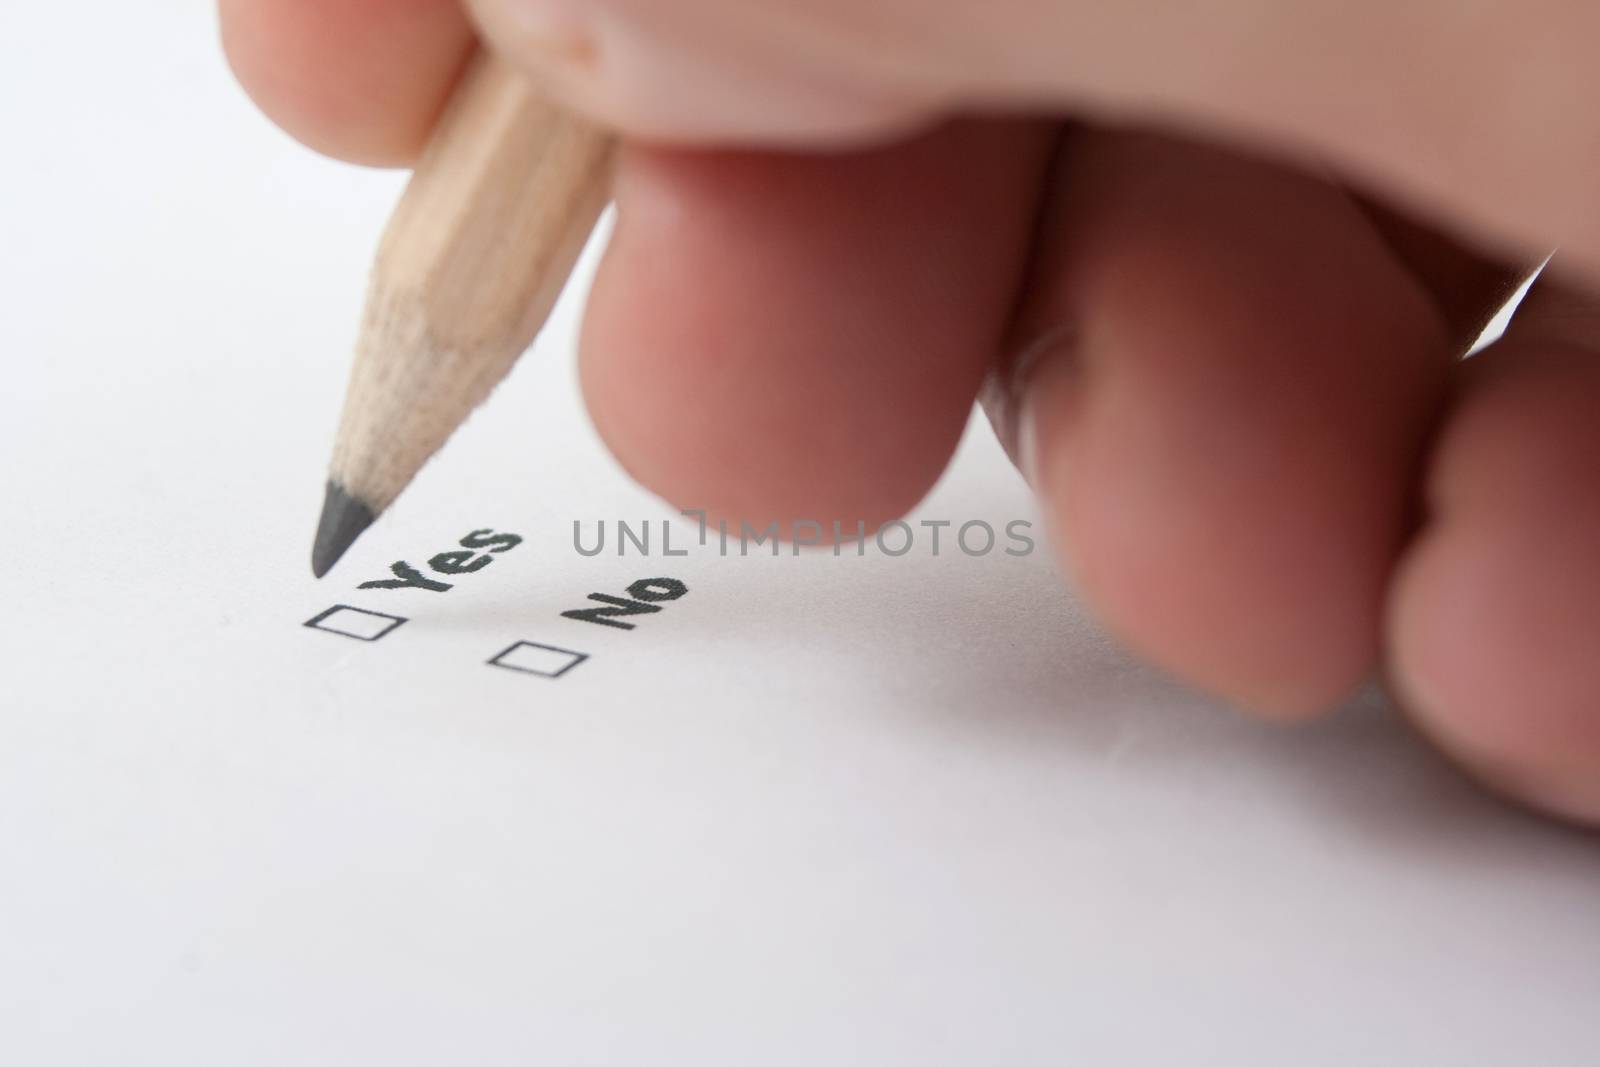 yes or no decition checkbox made with pencil